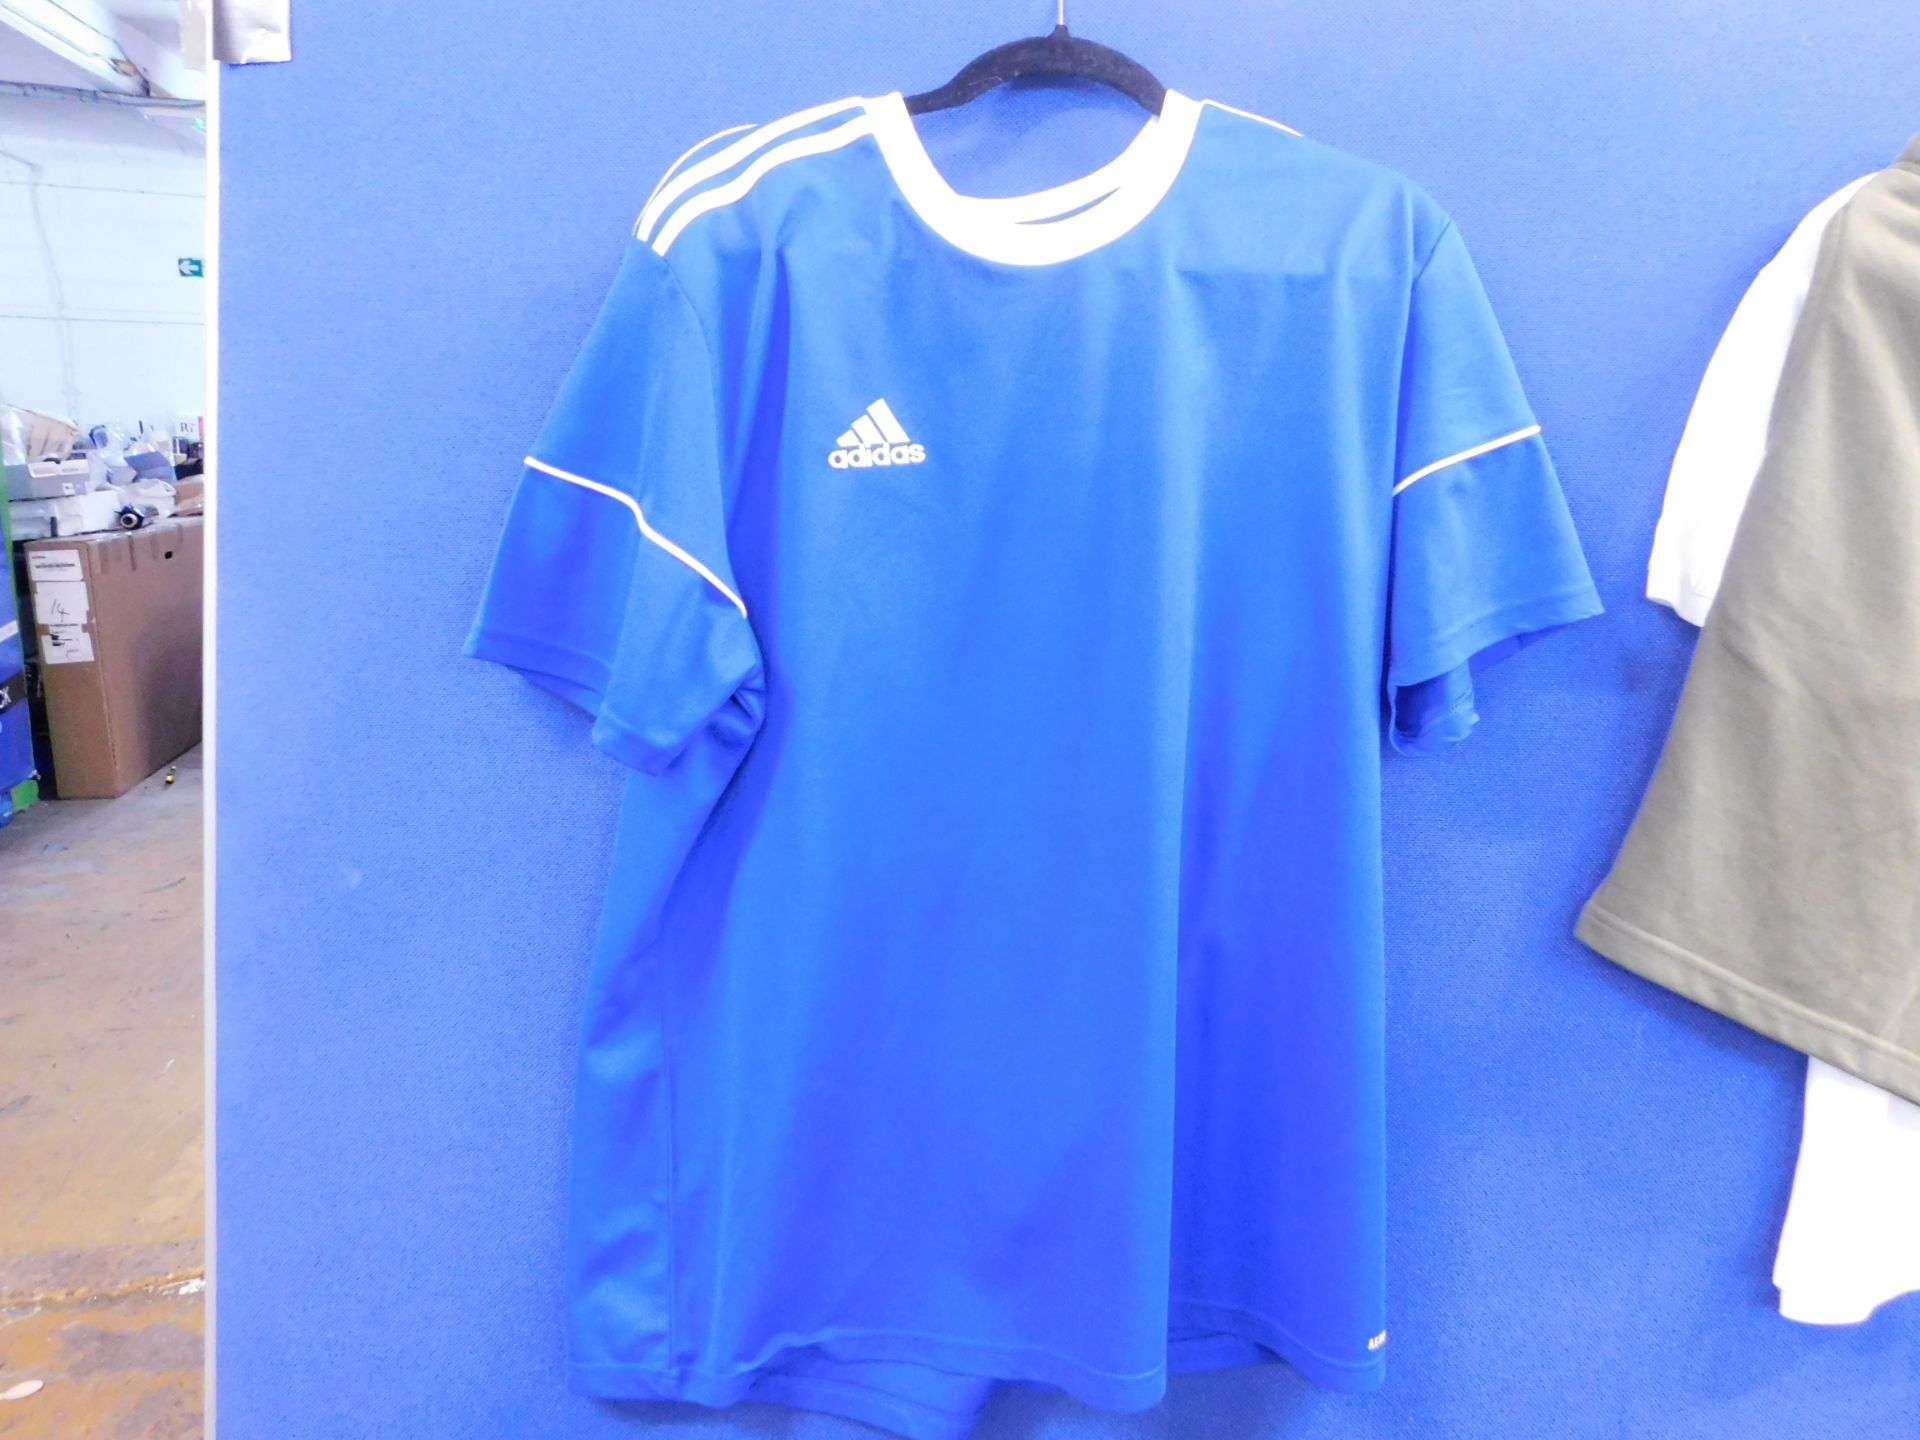 1 ADIDAS BLUE AND WHITE T-SHIRT SIZE XL RRP Â£29.99